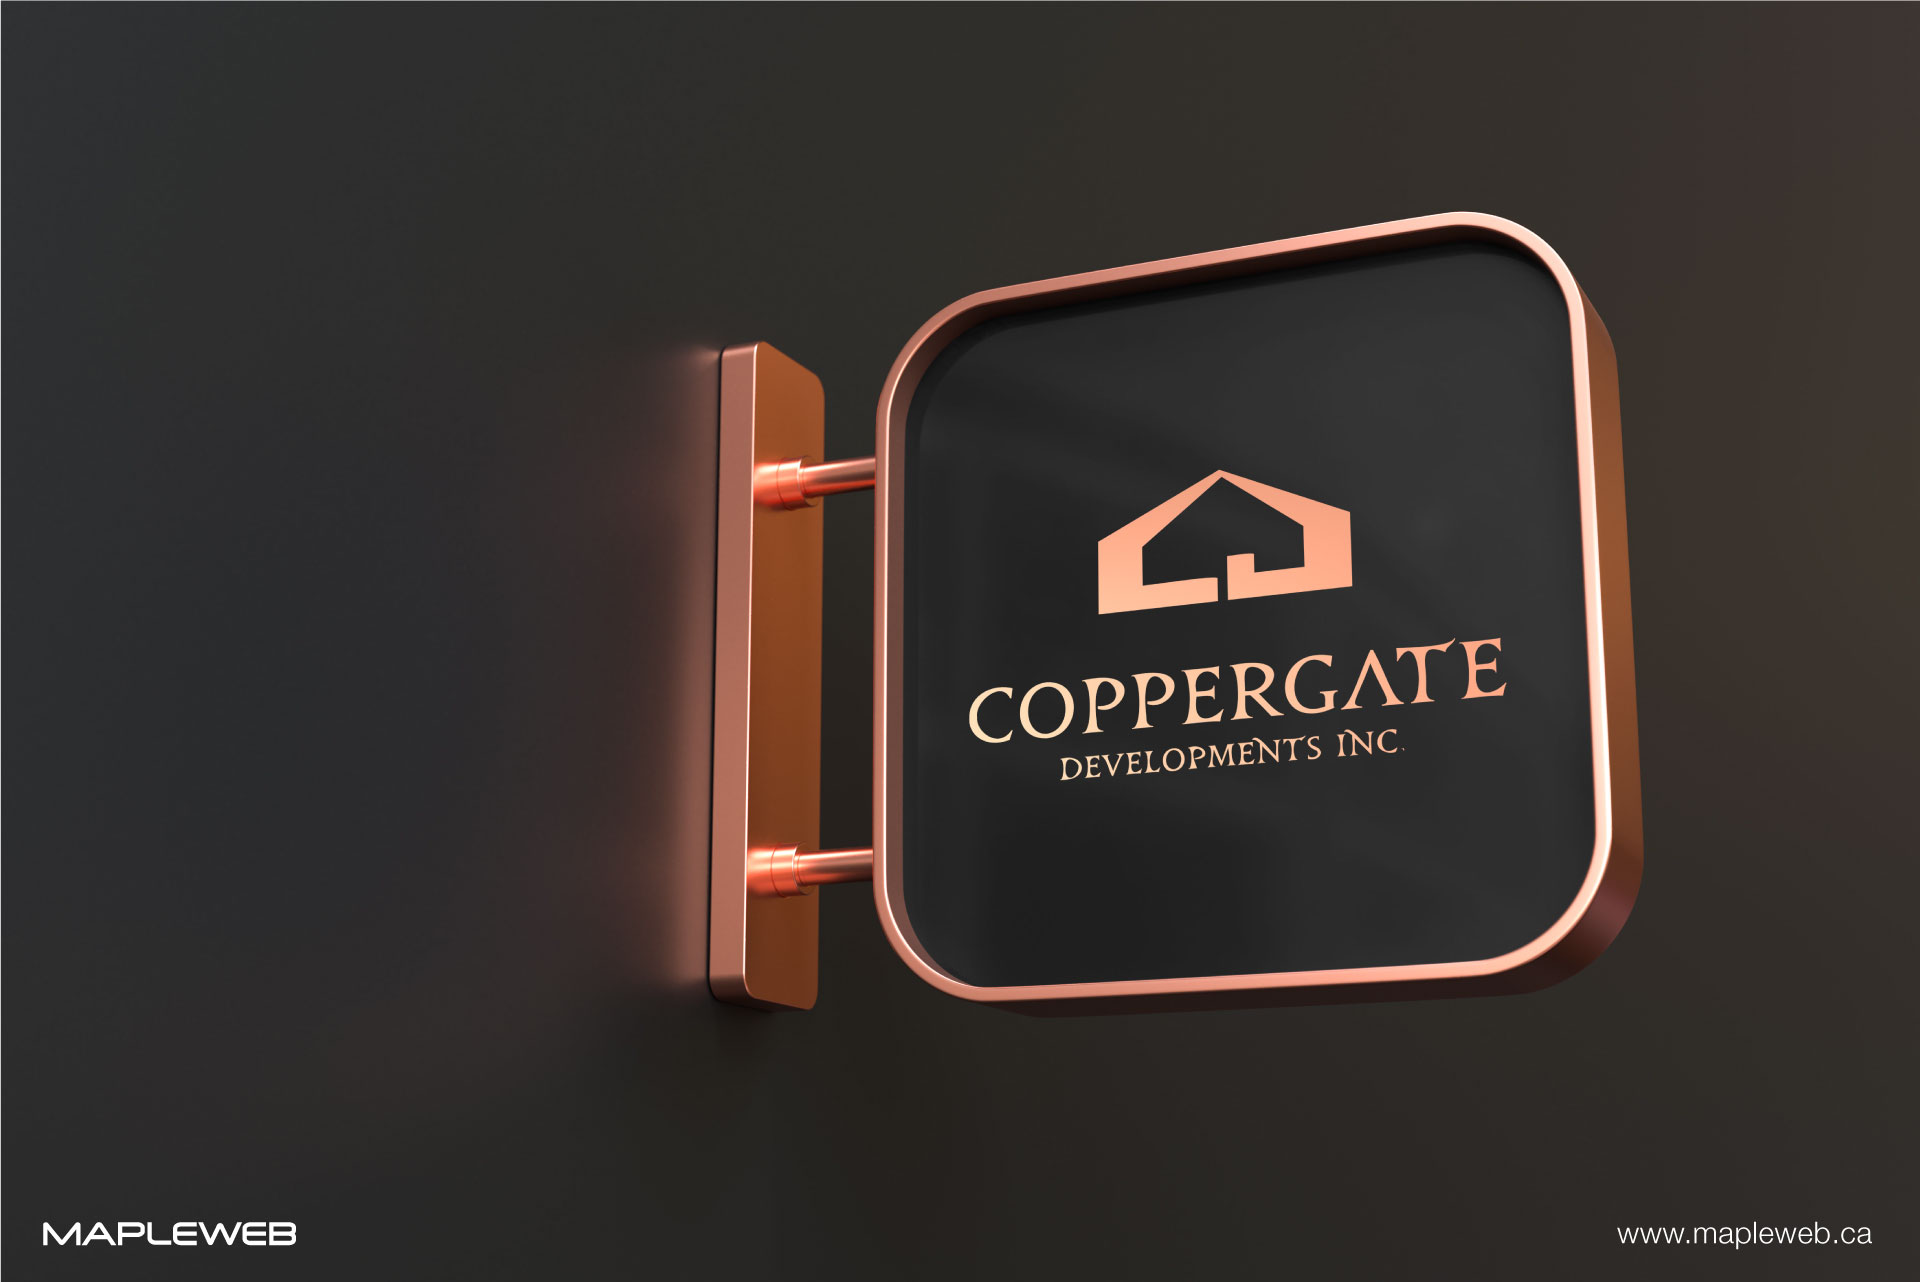 coppergate-brand-logo-design-by-mapleweb-vancouver-canada-wall-signage-mock